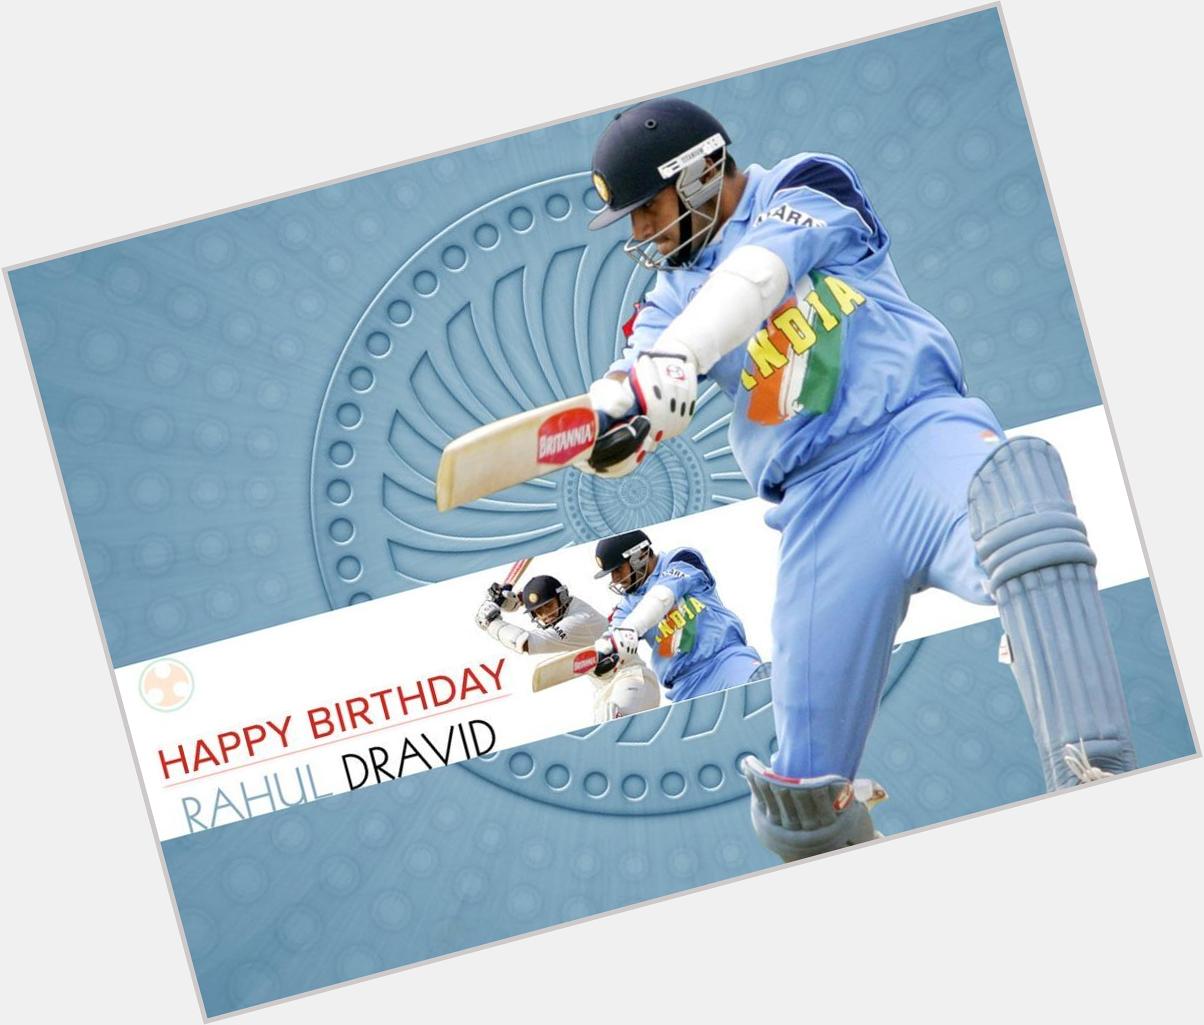 Wishes a very Happy Birthday to the legendary Rahul Dravid, \The Wall\ of Indian Cricket. 